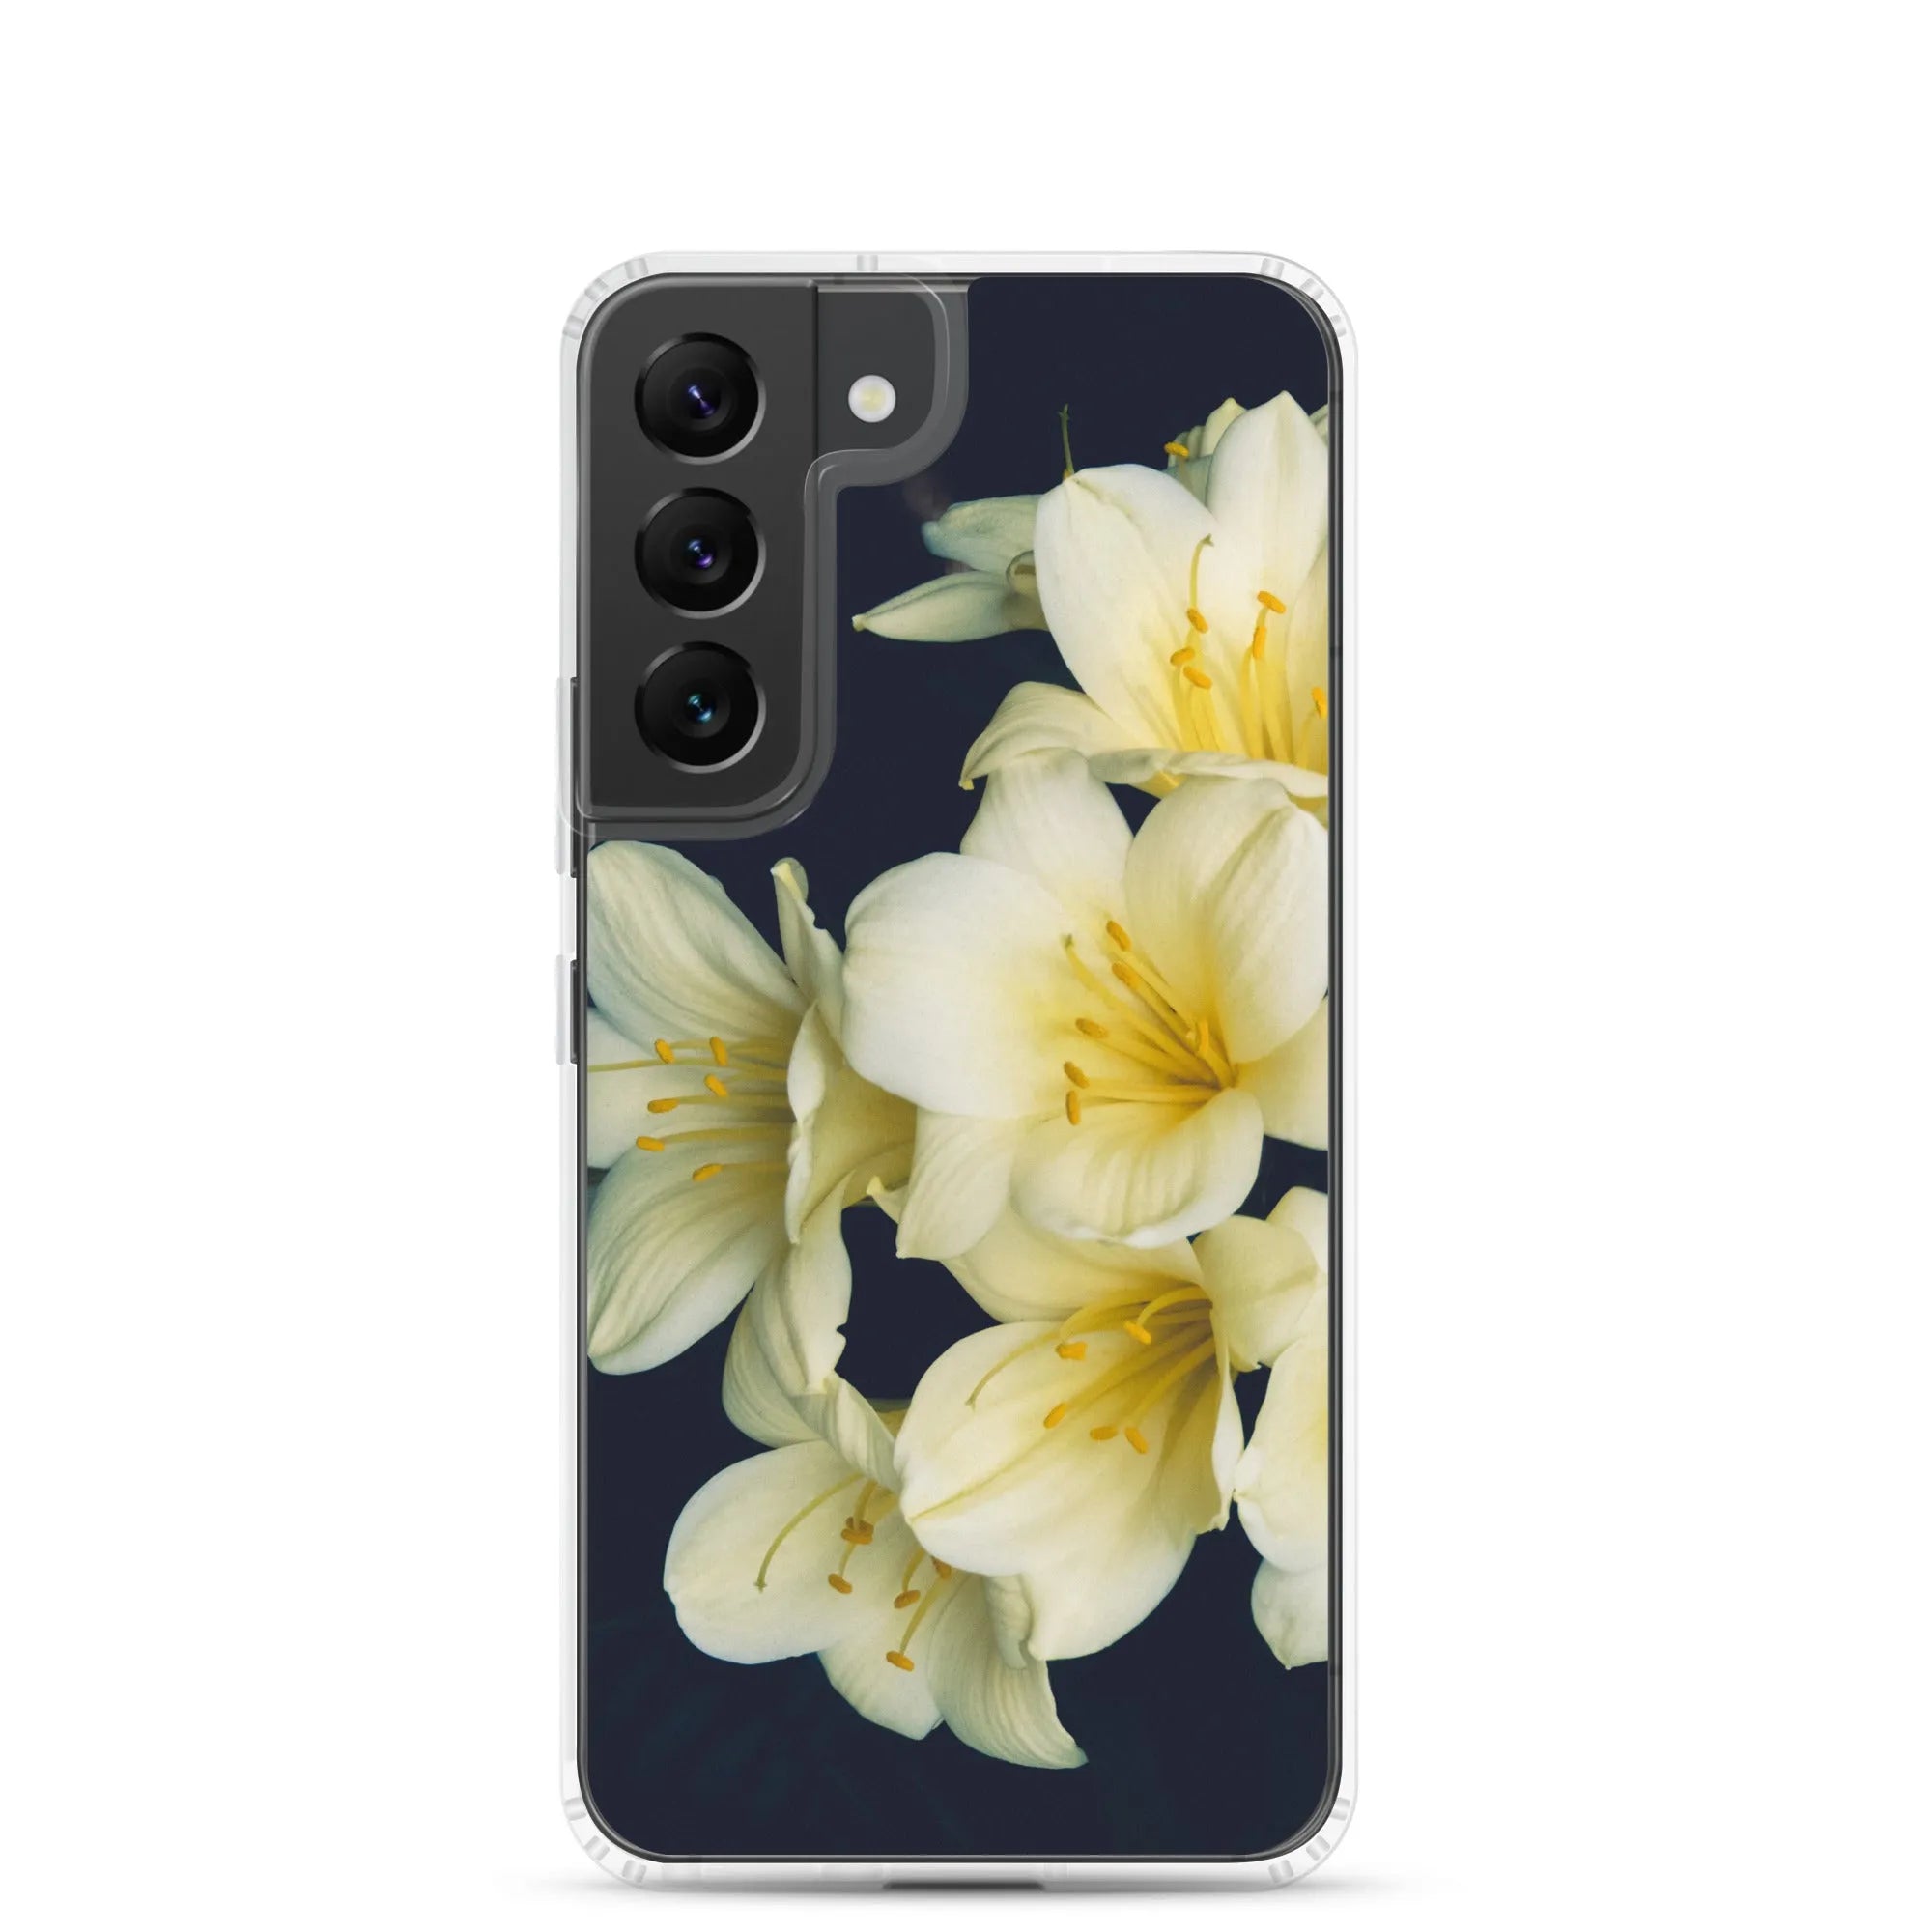 Flower Power 2 + Too Samsung Galaxy Case - Samsung Galaxy S22 - Mobile Phone Cases - Aesthetic Art